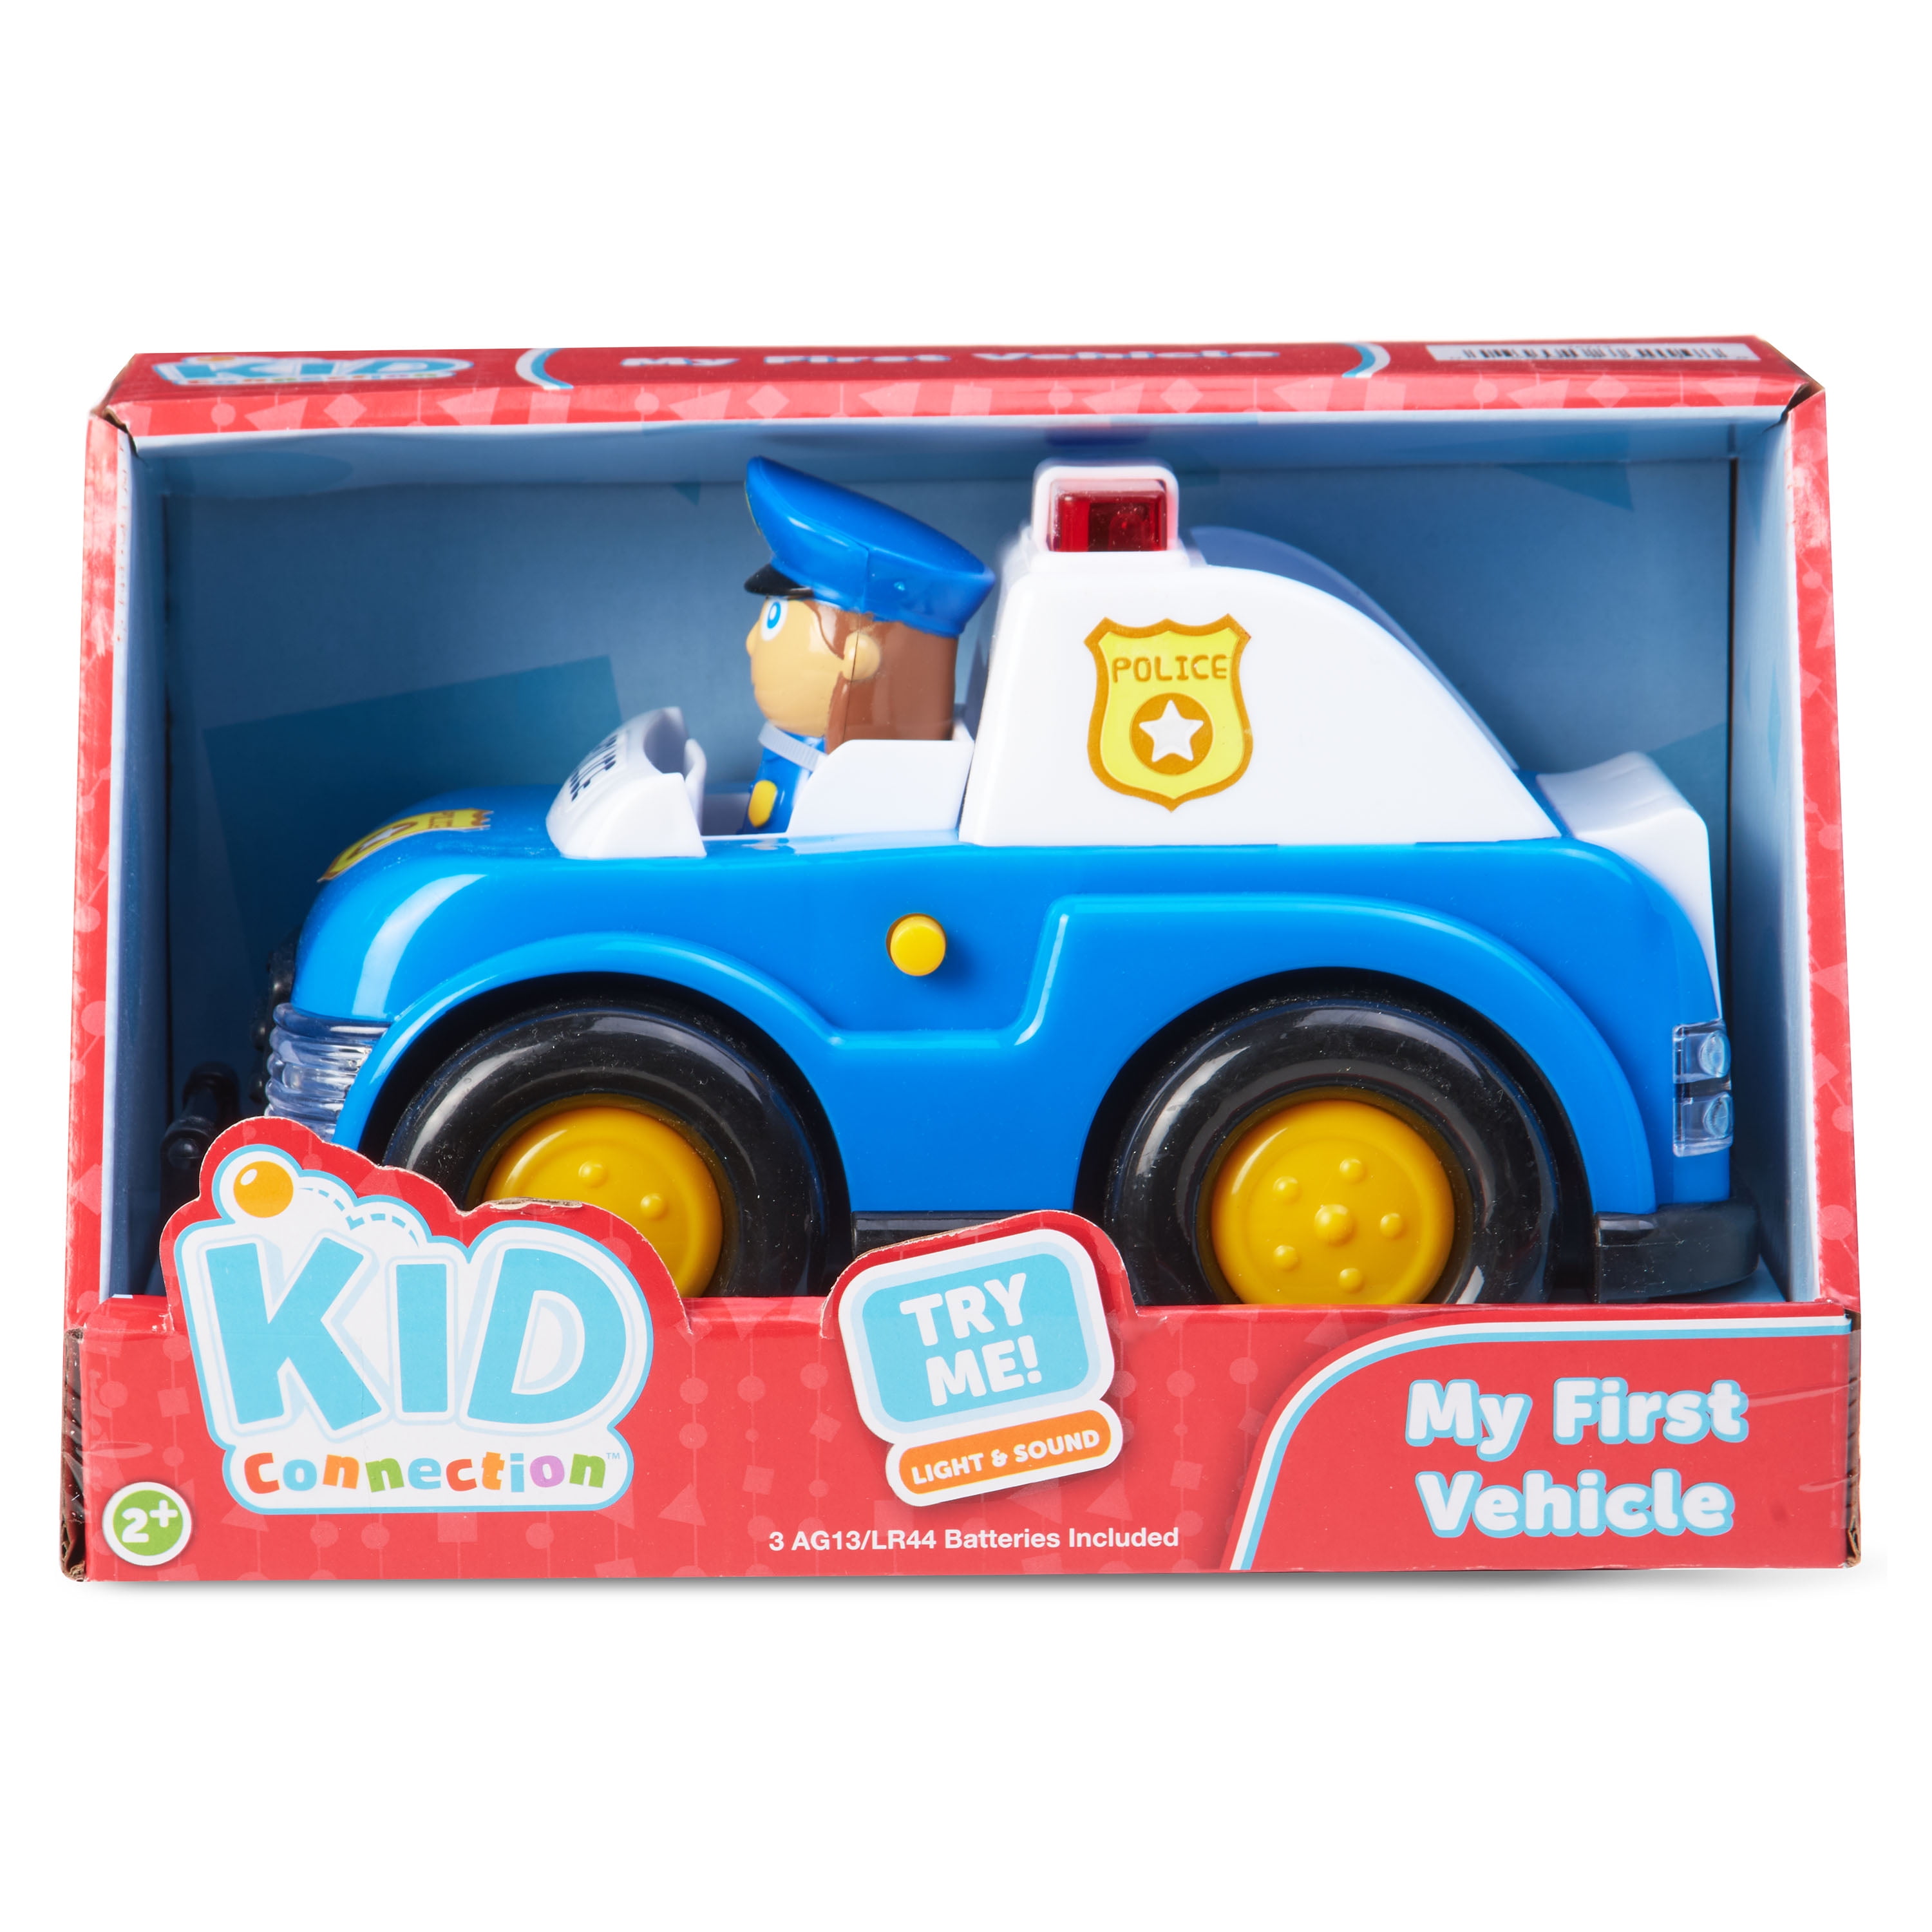 3D Puzzles Educational Police Wagon Model for Students Children Kids UK seller 